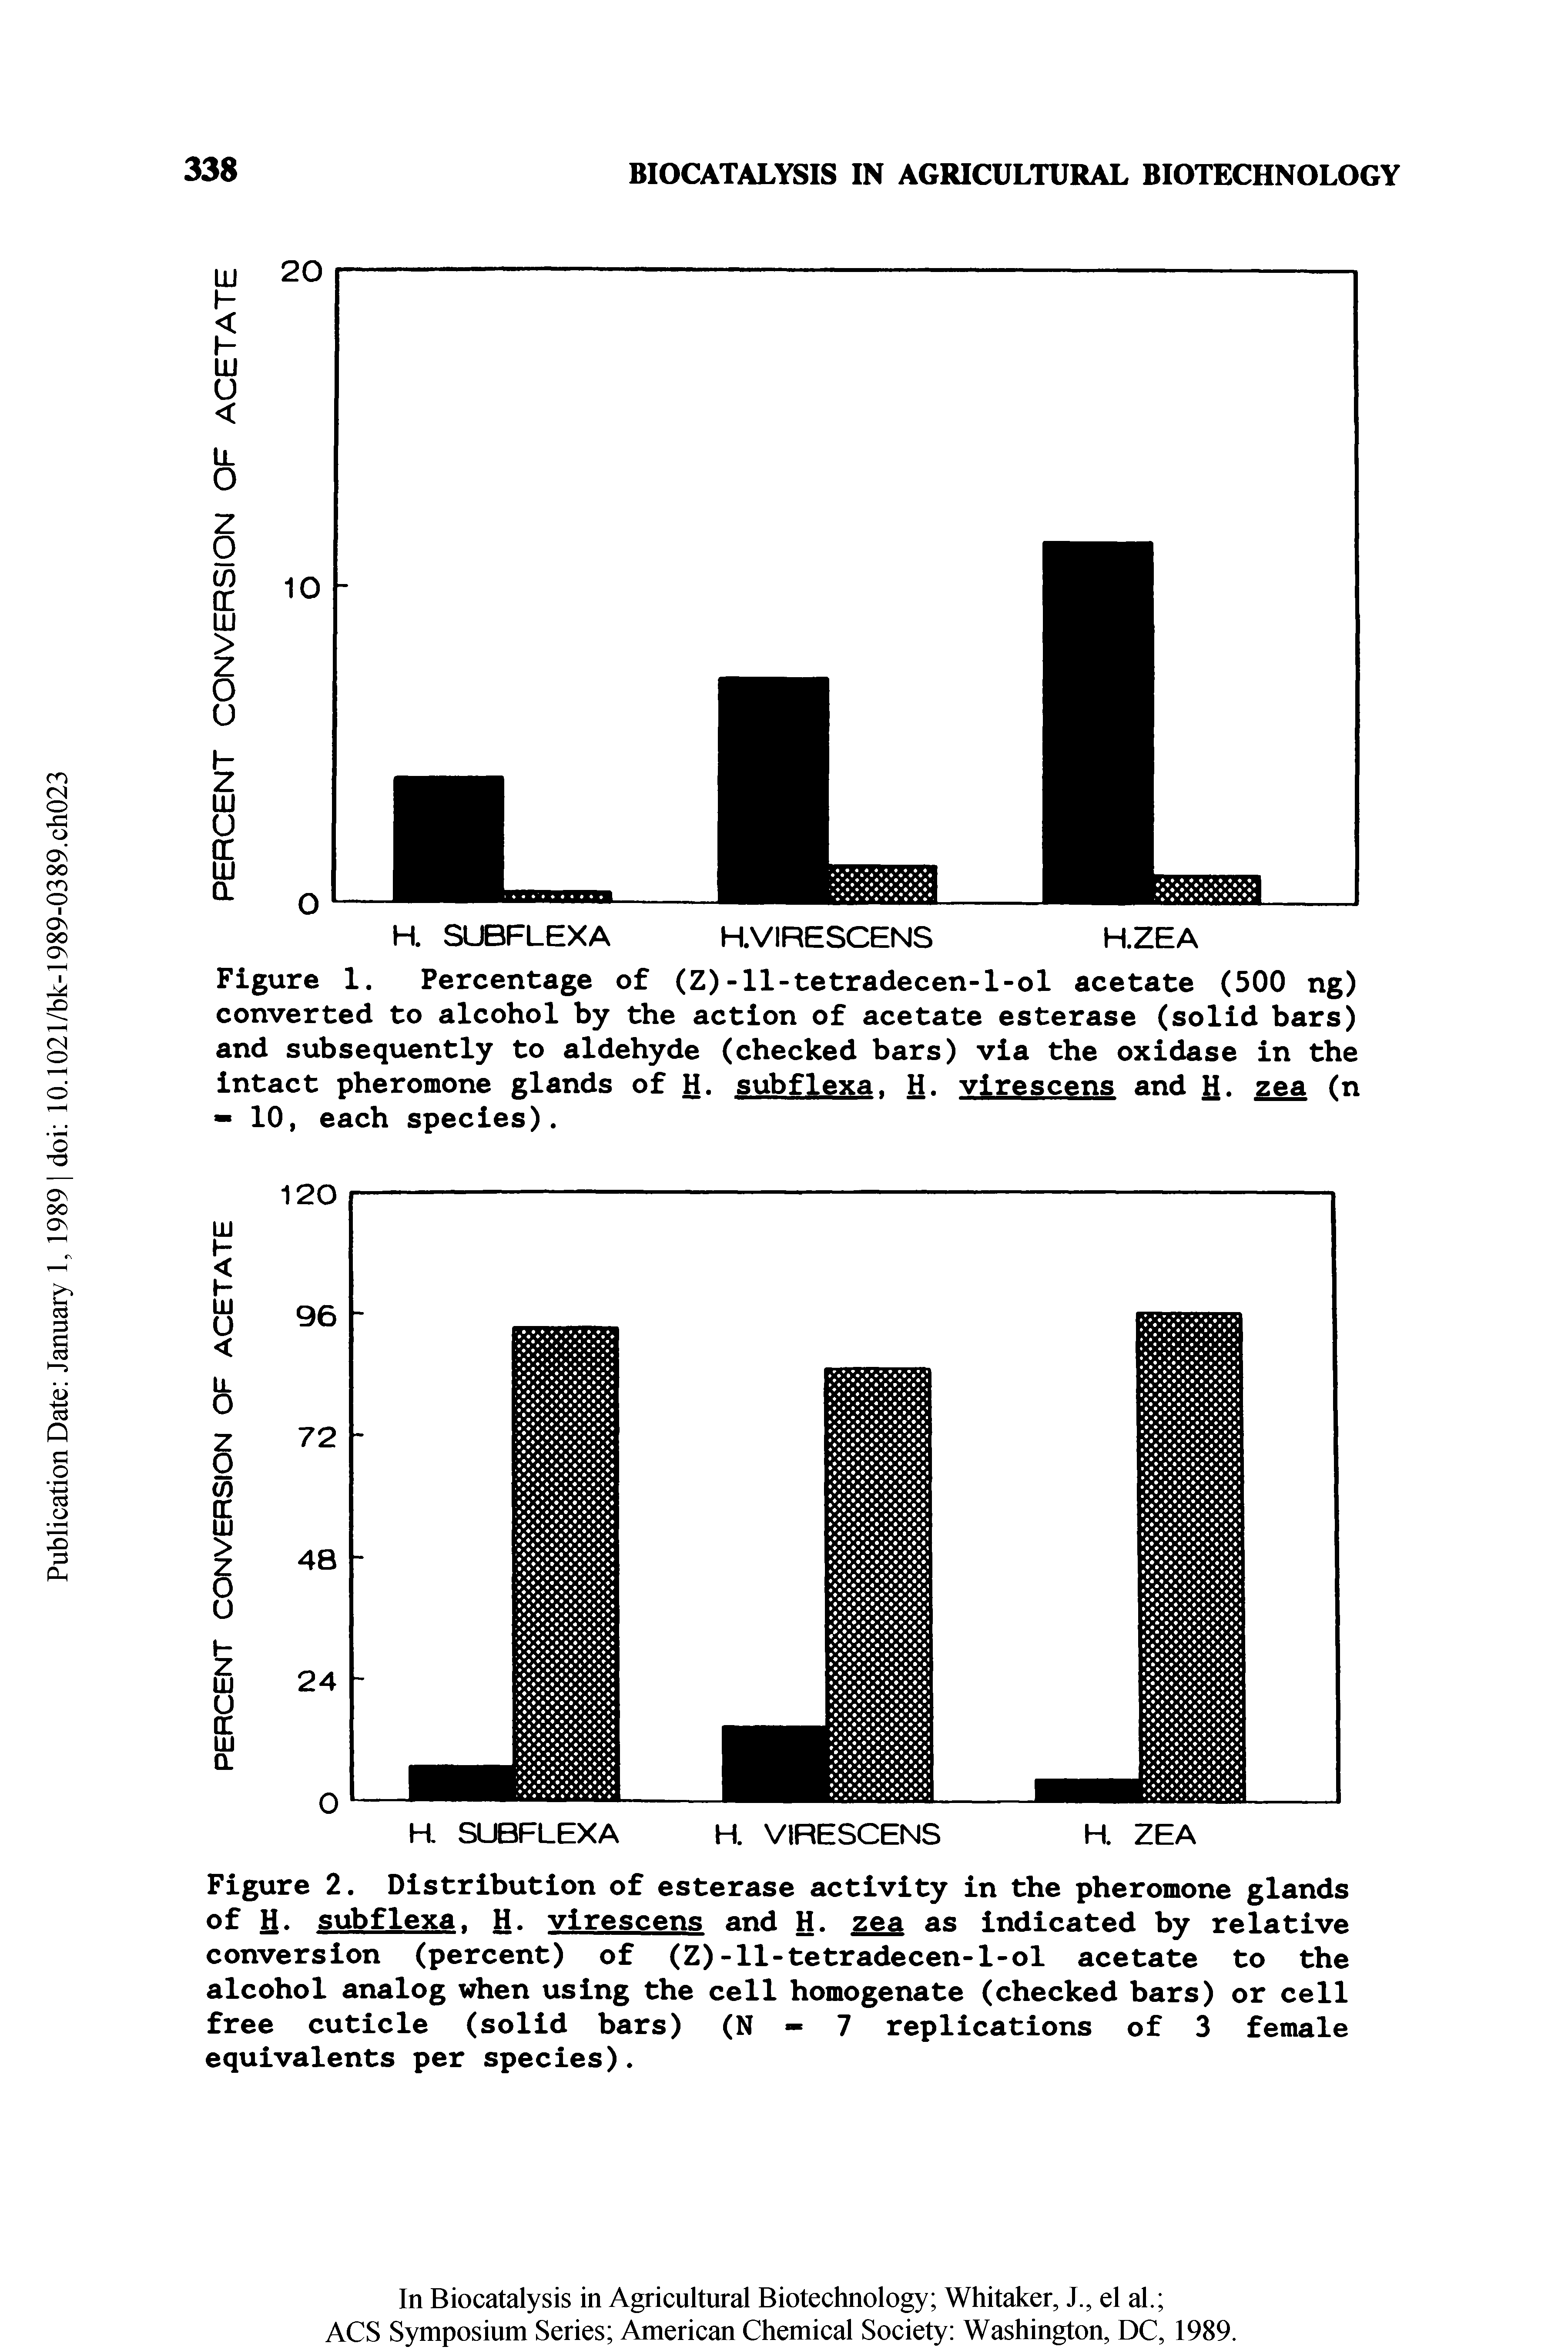 Figure 2. Distribution of esterase activity in the pheromone glands of H. subf lexa. H. virescens and H. zea as indicated by relative conversion (percent) of (Z)-11-tetradecen-l-ol acetate to the alcohol analog when using the cell homogenate (checked bars) or cell free cuticle (solid bars) (N - 7 replications of 3 female equivalents per species).